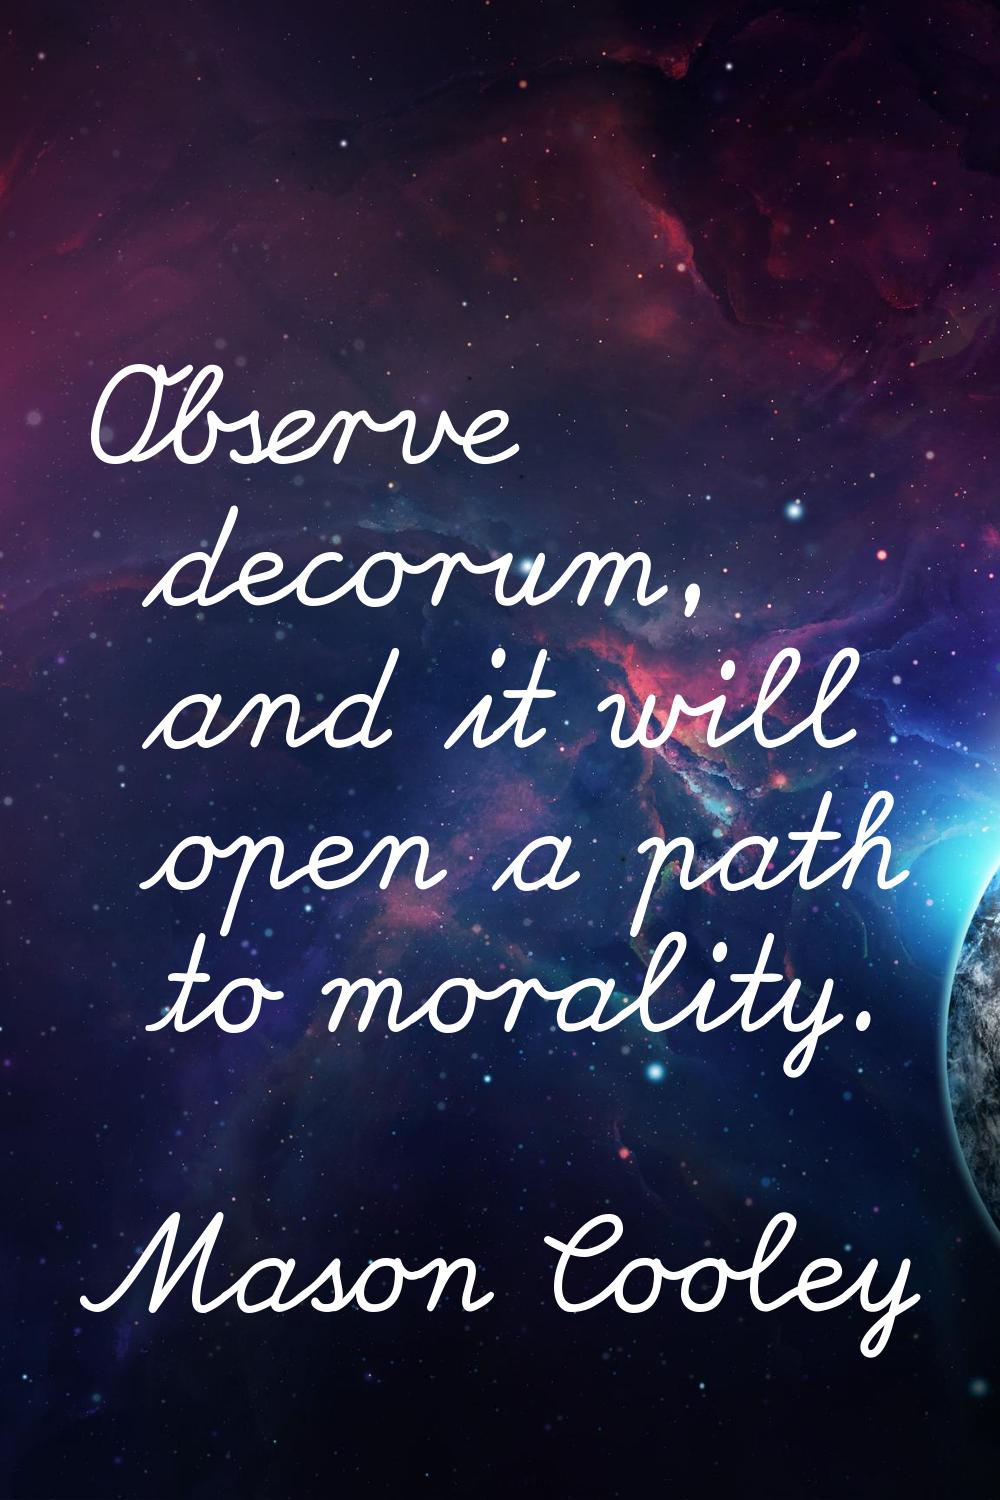 Observe decorum, and it will open a path to morality.